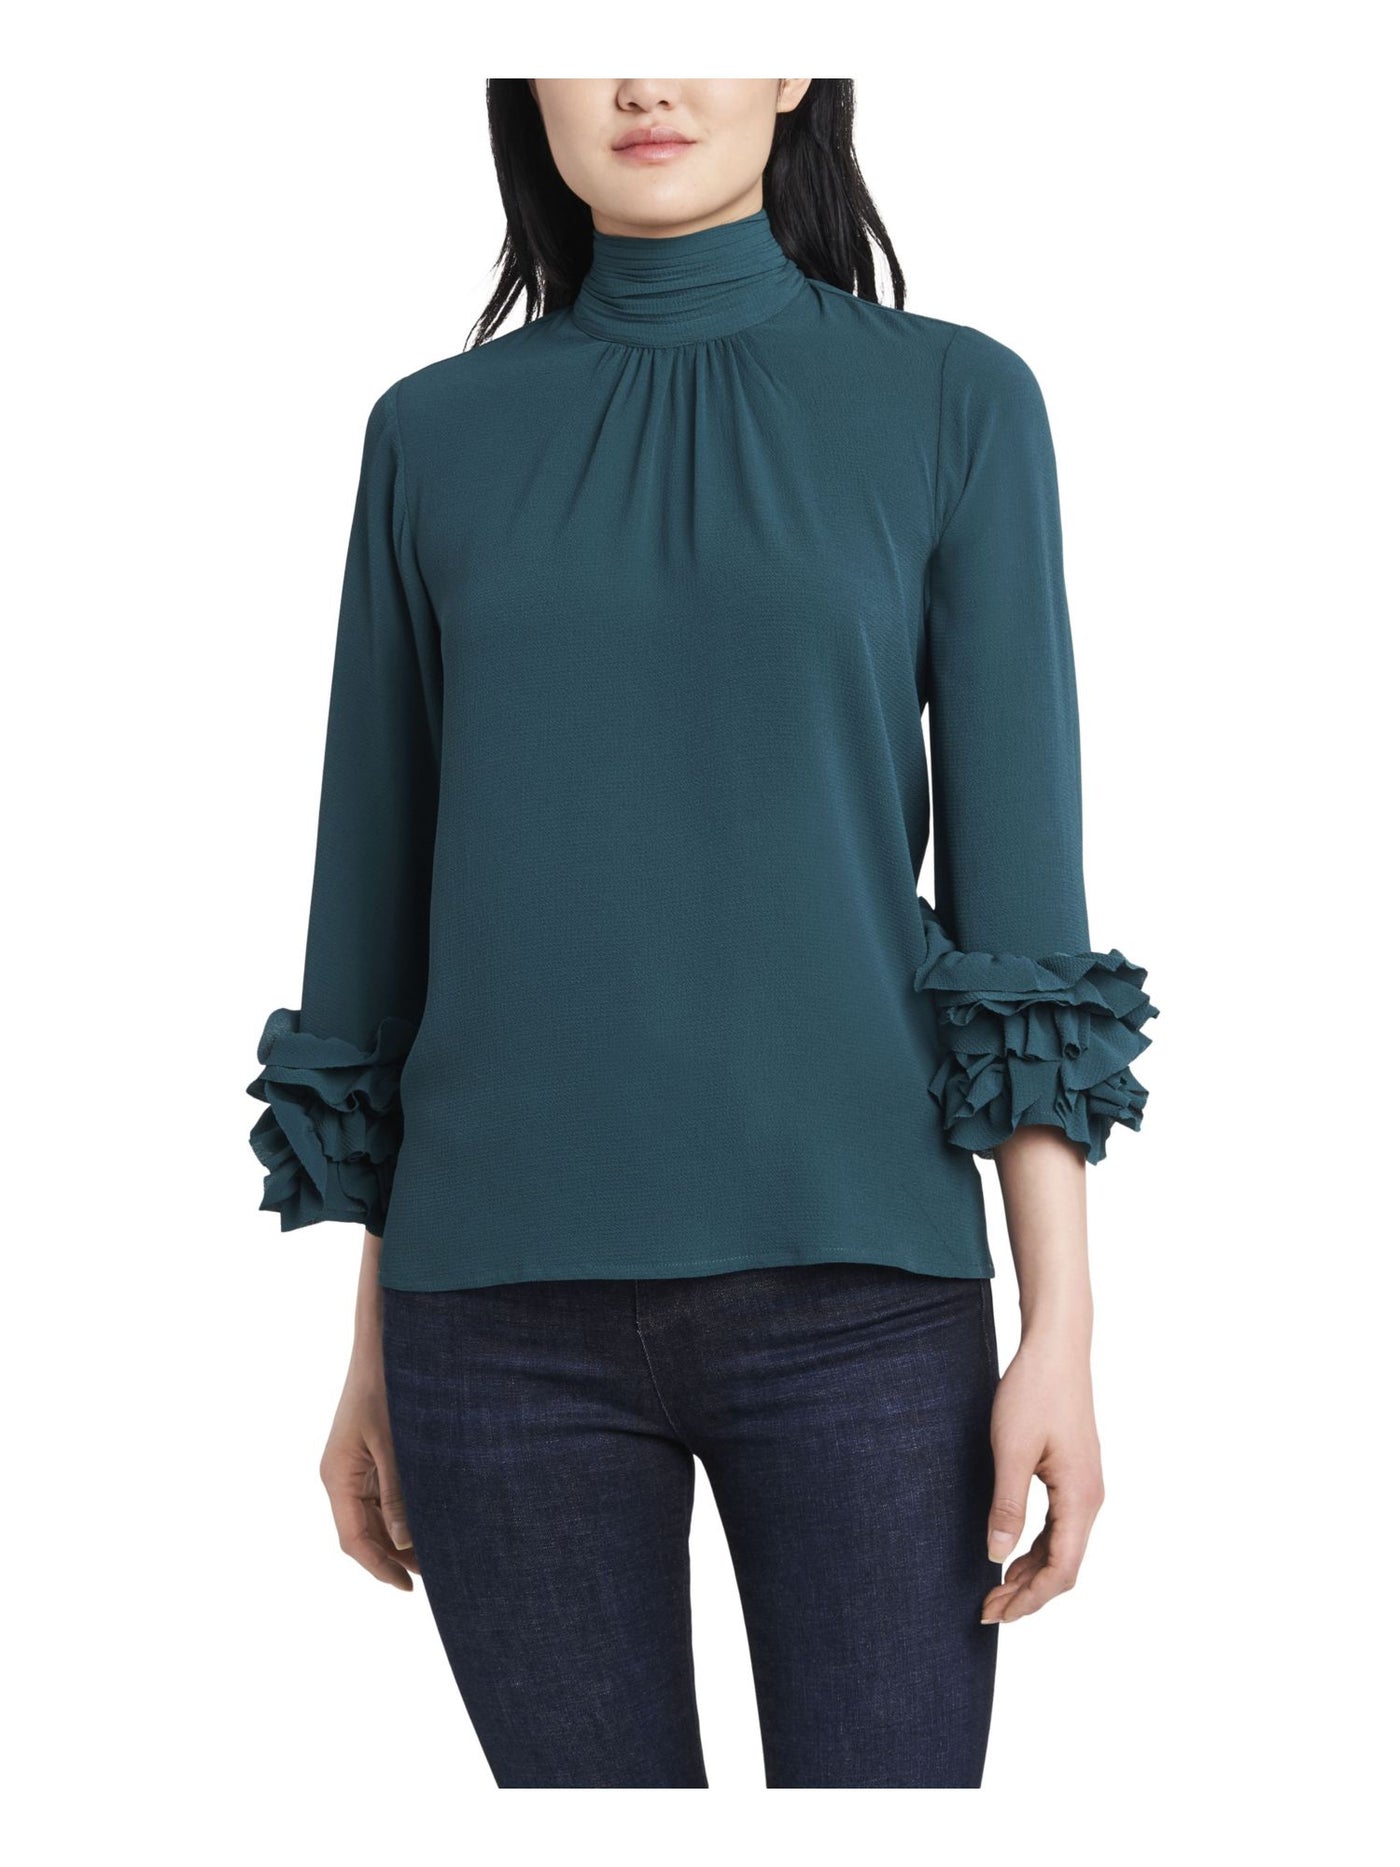 VINCE CAMUTO Womens Green Ruffled Gathered Keyhole Back 3/4 Sleeve Mock Neck Wear To Work Top M